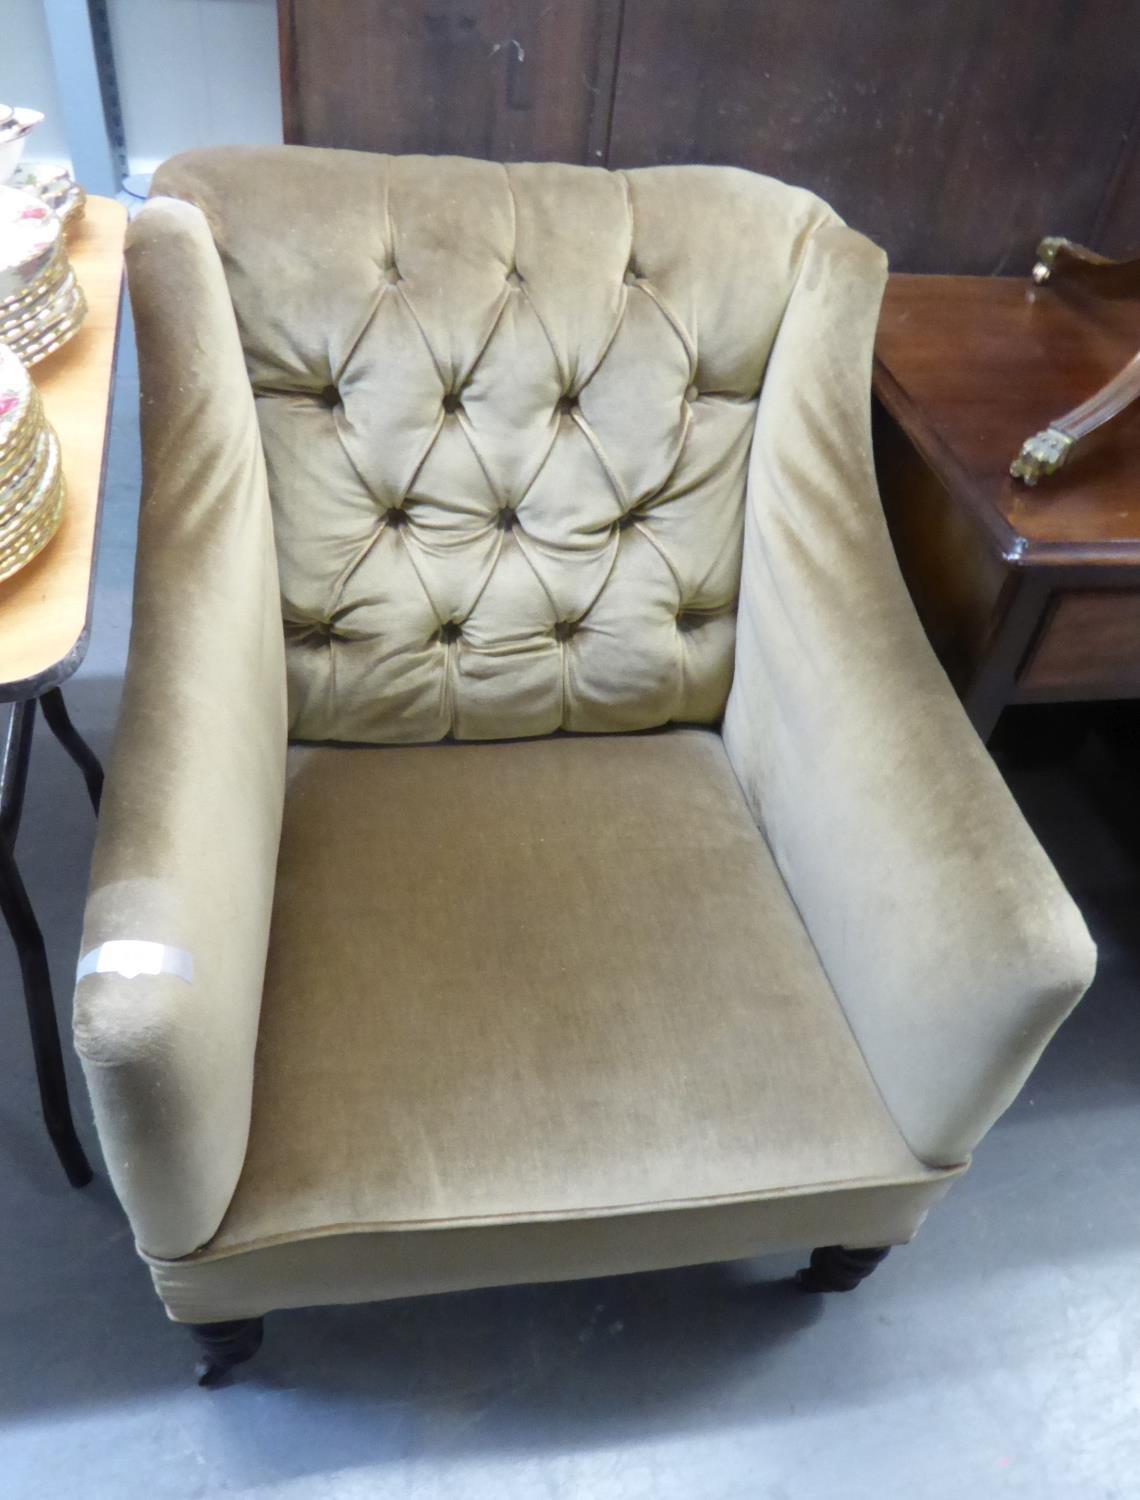 AN EDWARDIAN EASY ARMCHAIR, OF SQUARE FORM WITH BUTTON BACK, COVERED IN GOLD COLOURED FABRIC AND